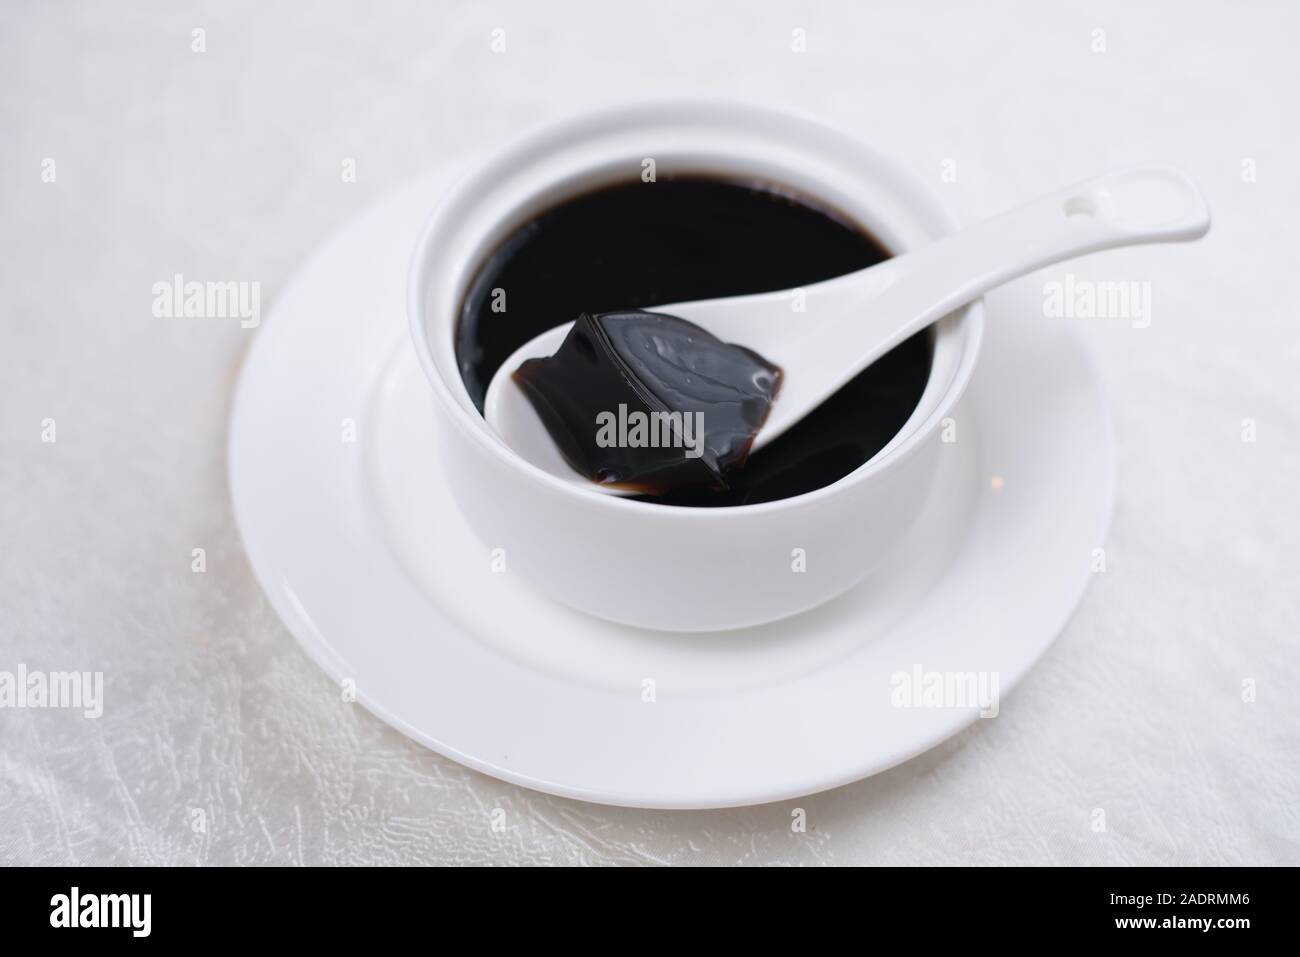 Grass jelly It's Southeast Asia Dessert made from made by boiling the aged and slightly oxidized stalks. Stock Photo